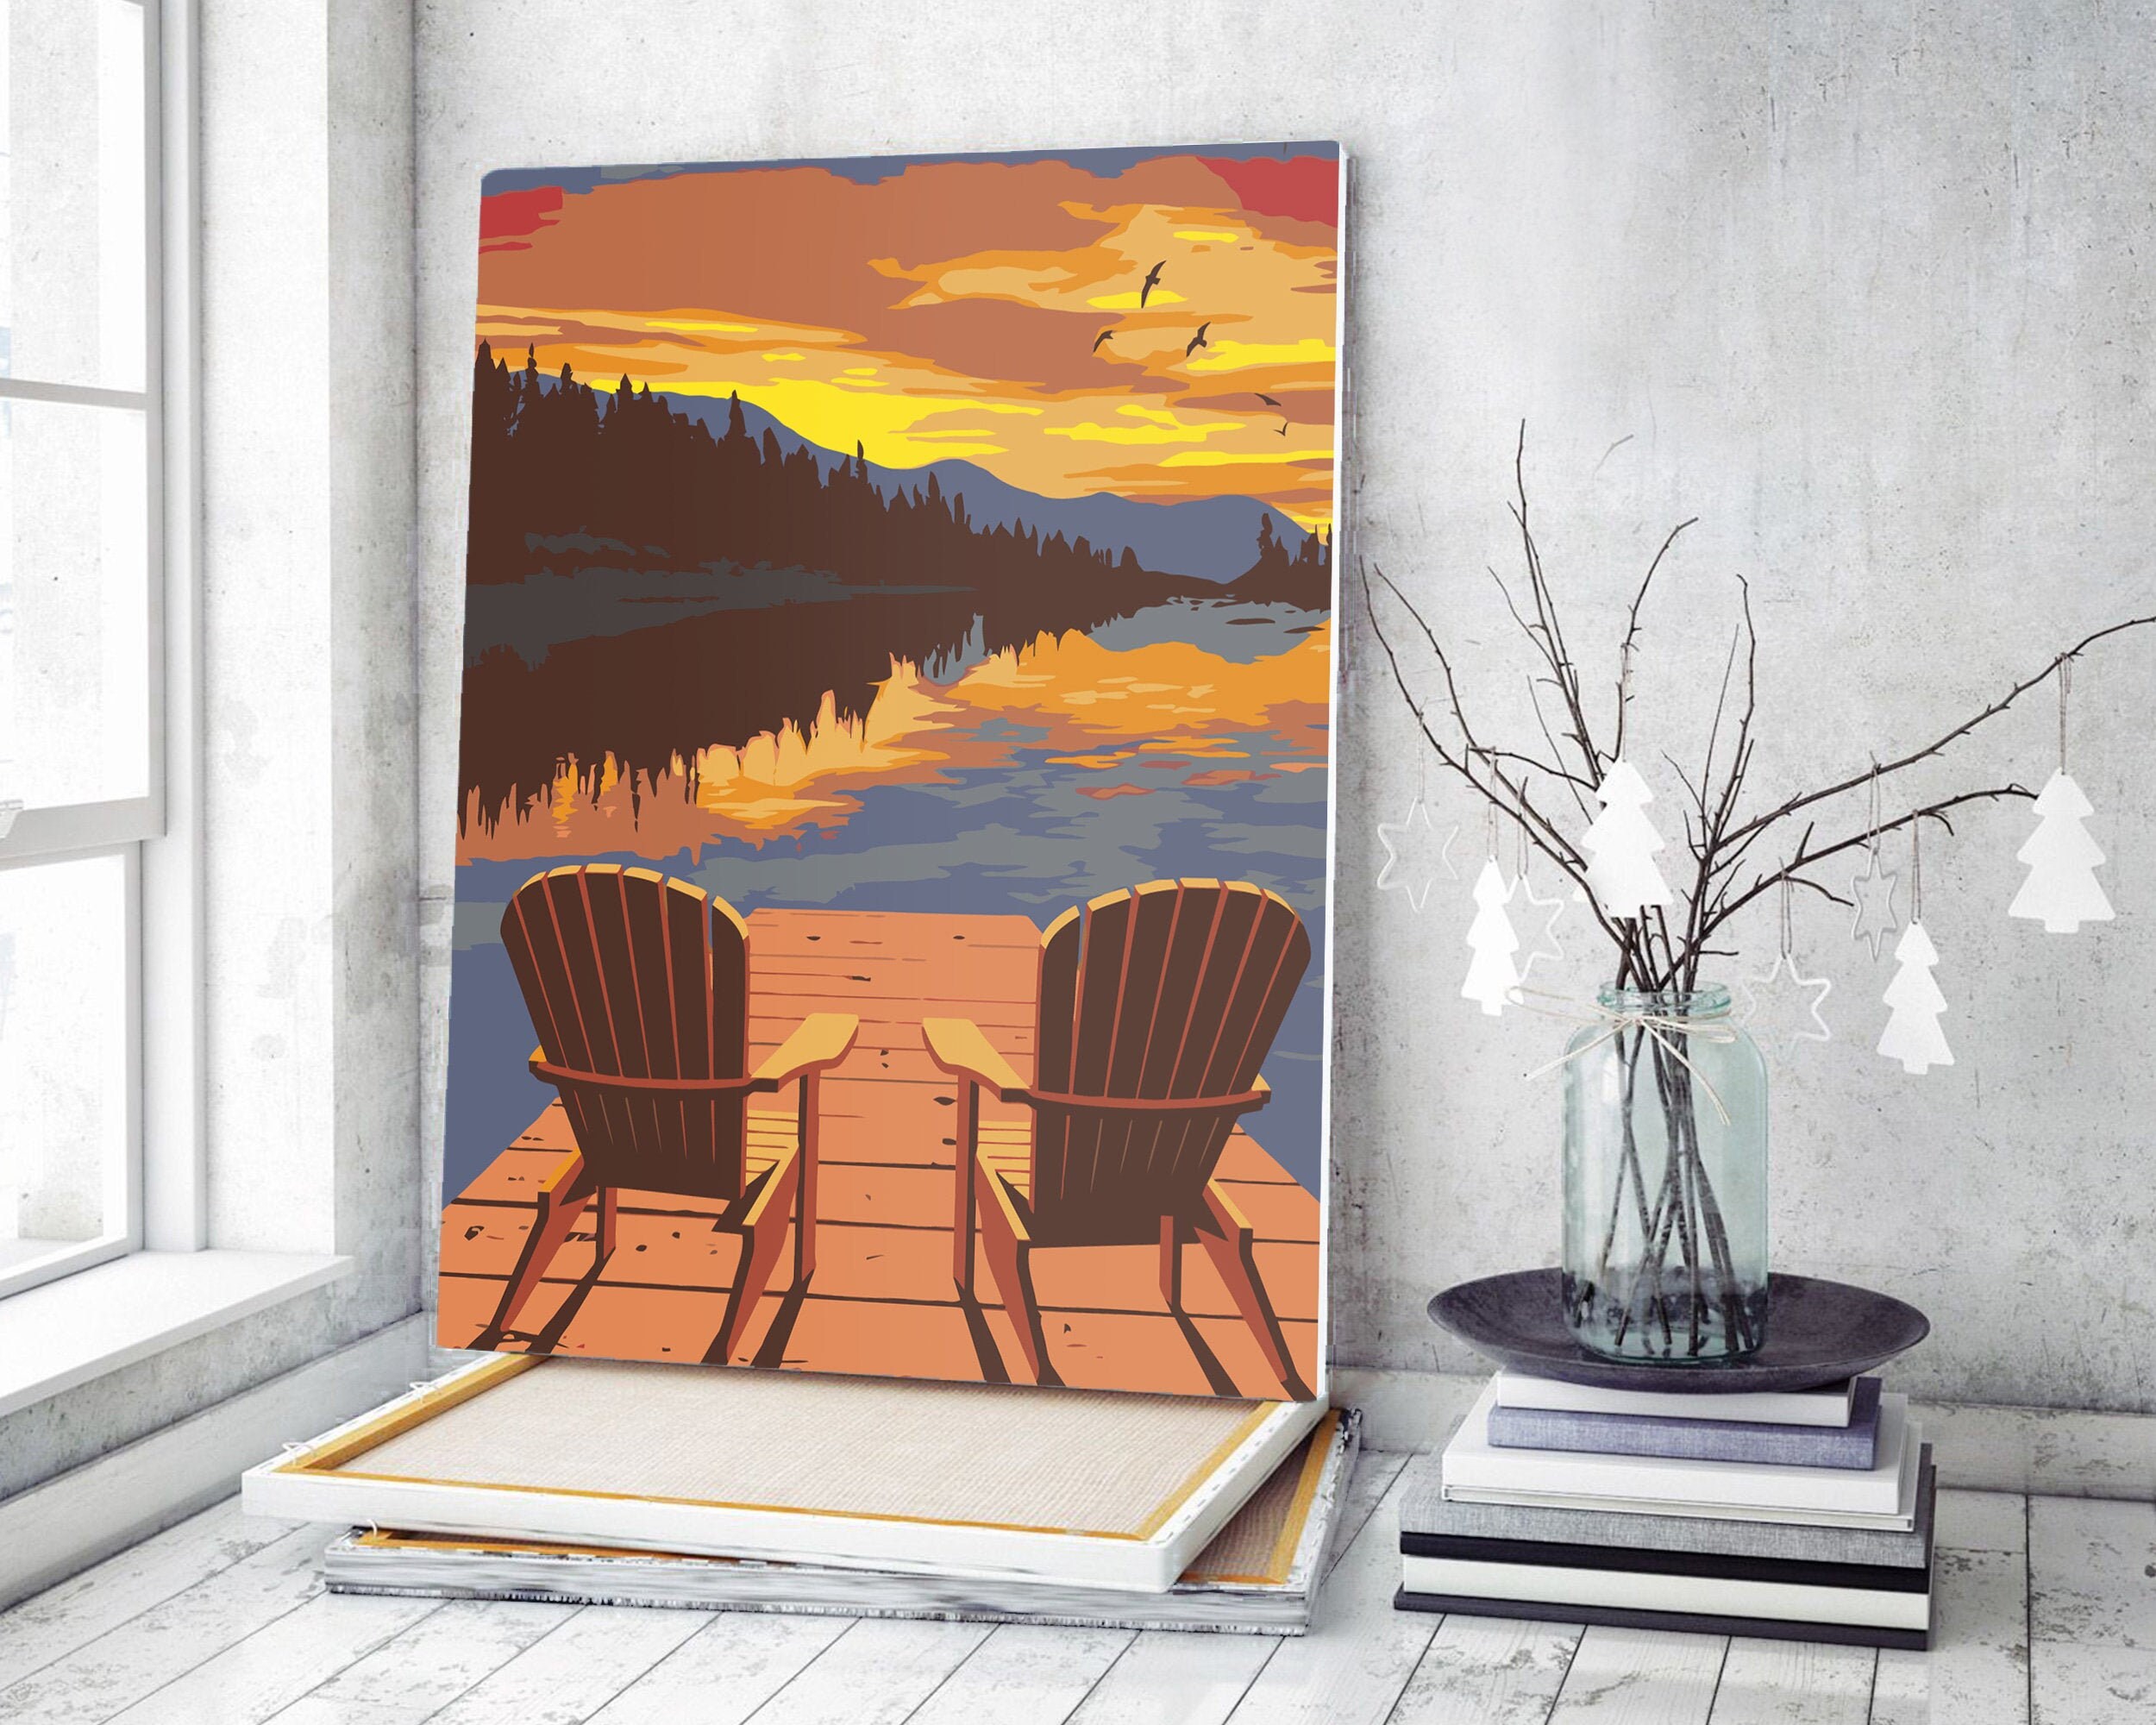 Home at Sunset- paint by number kit - Village Frame Shoppe & Gallery